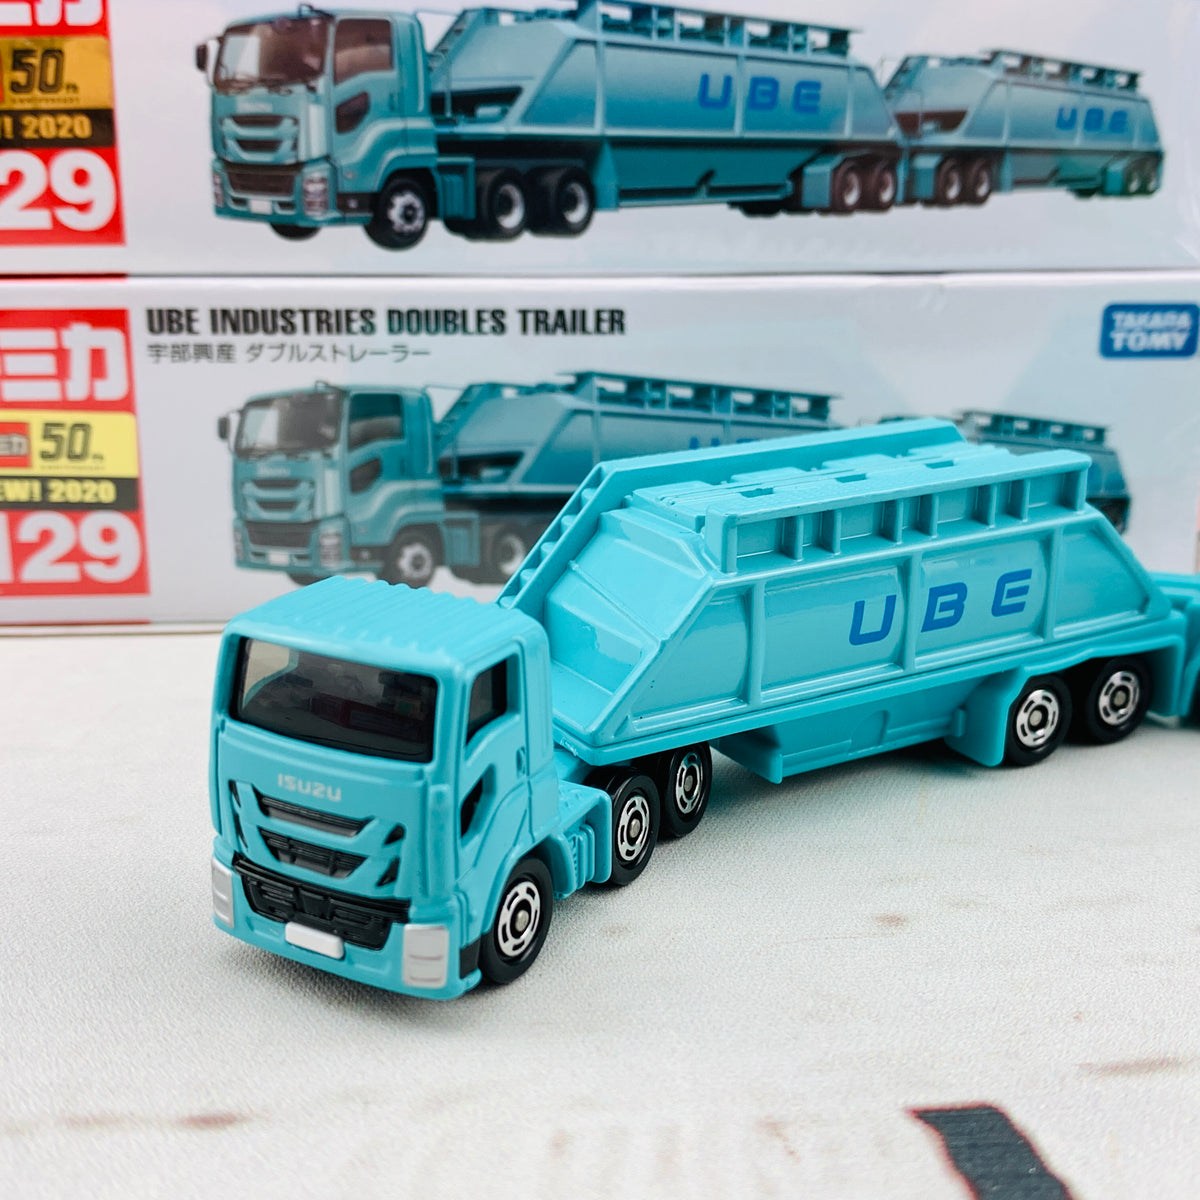 TOMICA 129 UBE Industries Coubles Tralier 宇部興産 ダブルス 